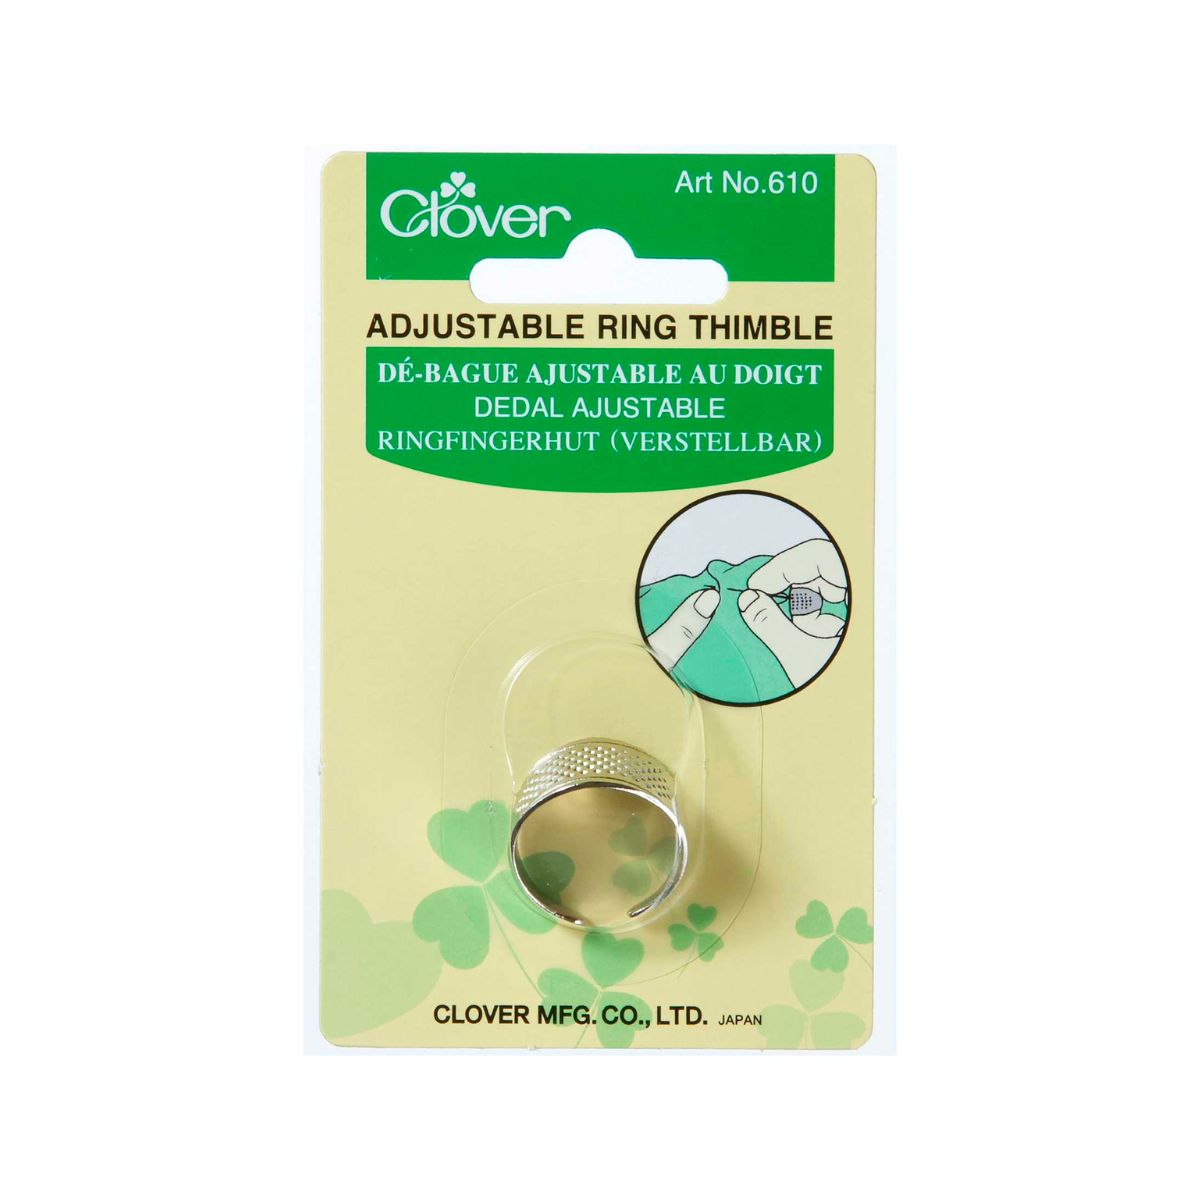 Clover adjustable ring thimble